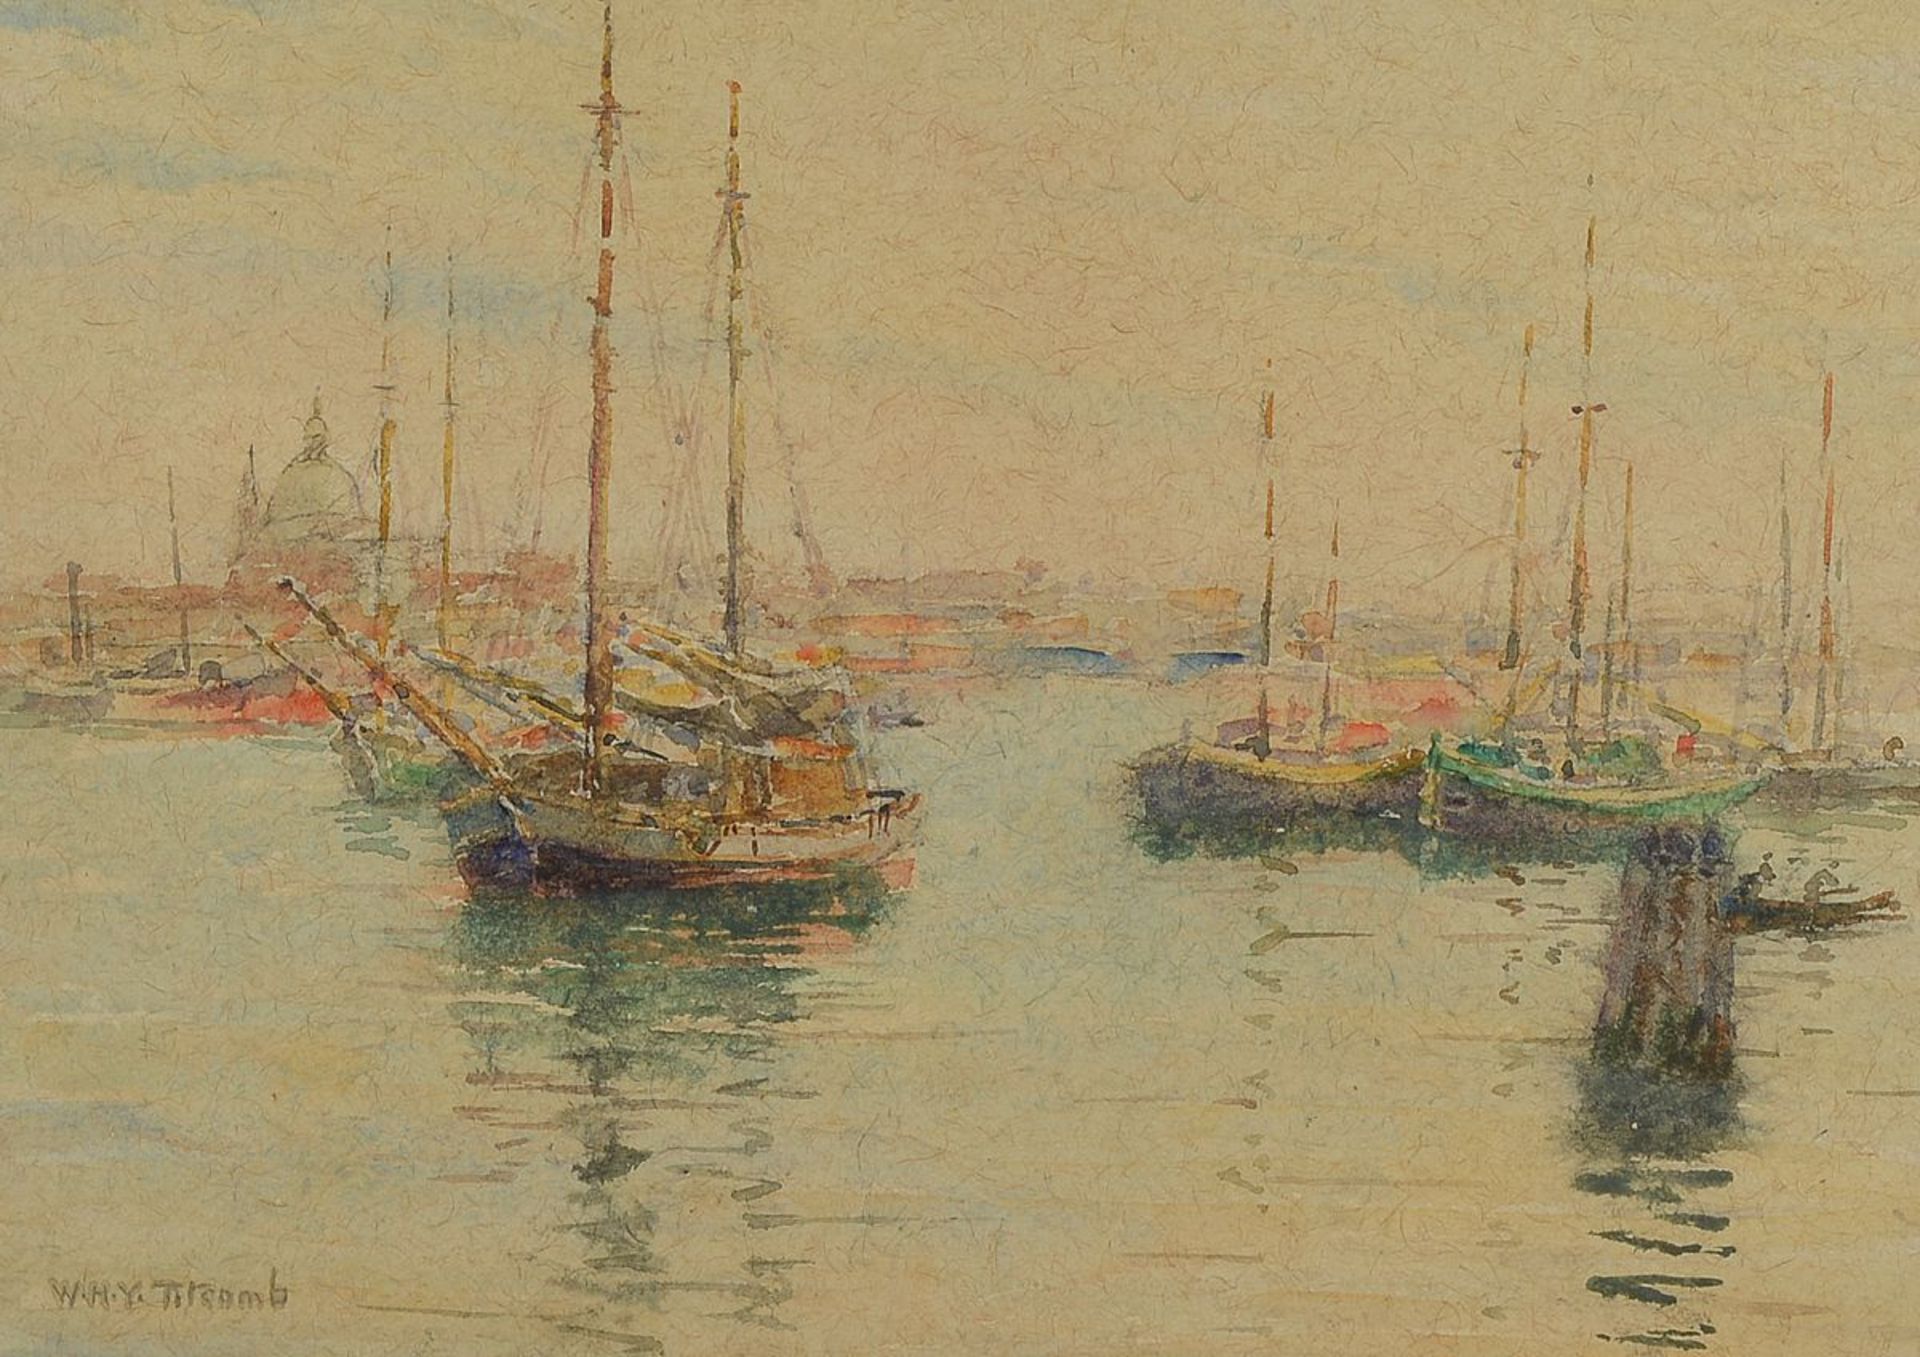 William Holt Titcomb, 1859-1930, view of a harbor, probably Venice, watercolor on paper, signed